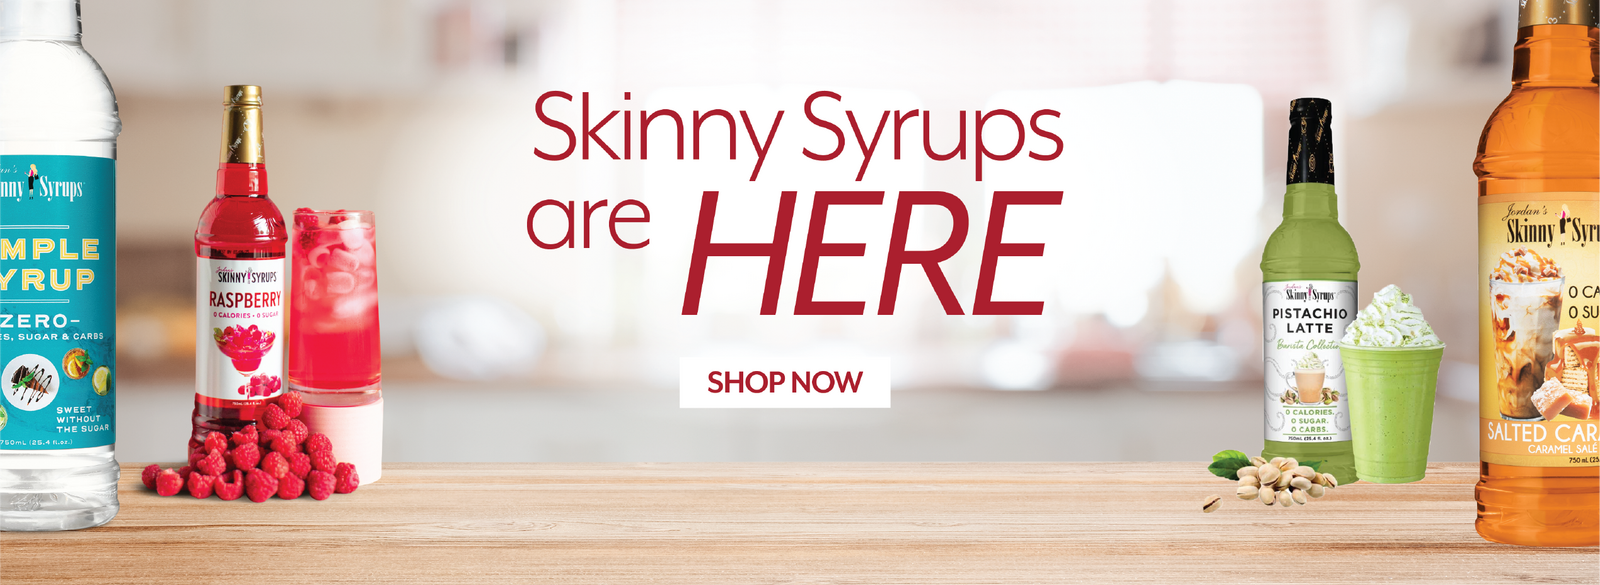 Skinny Syrups are here!